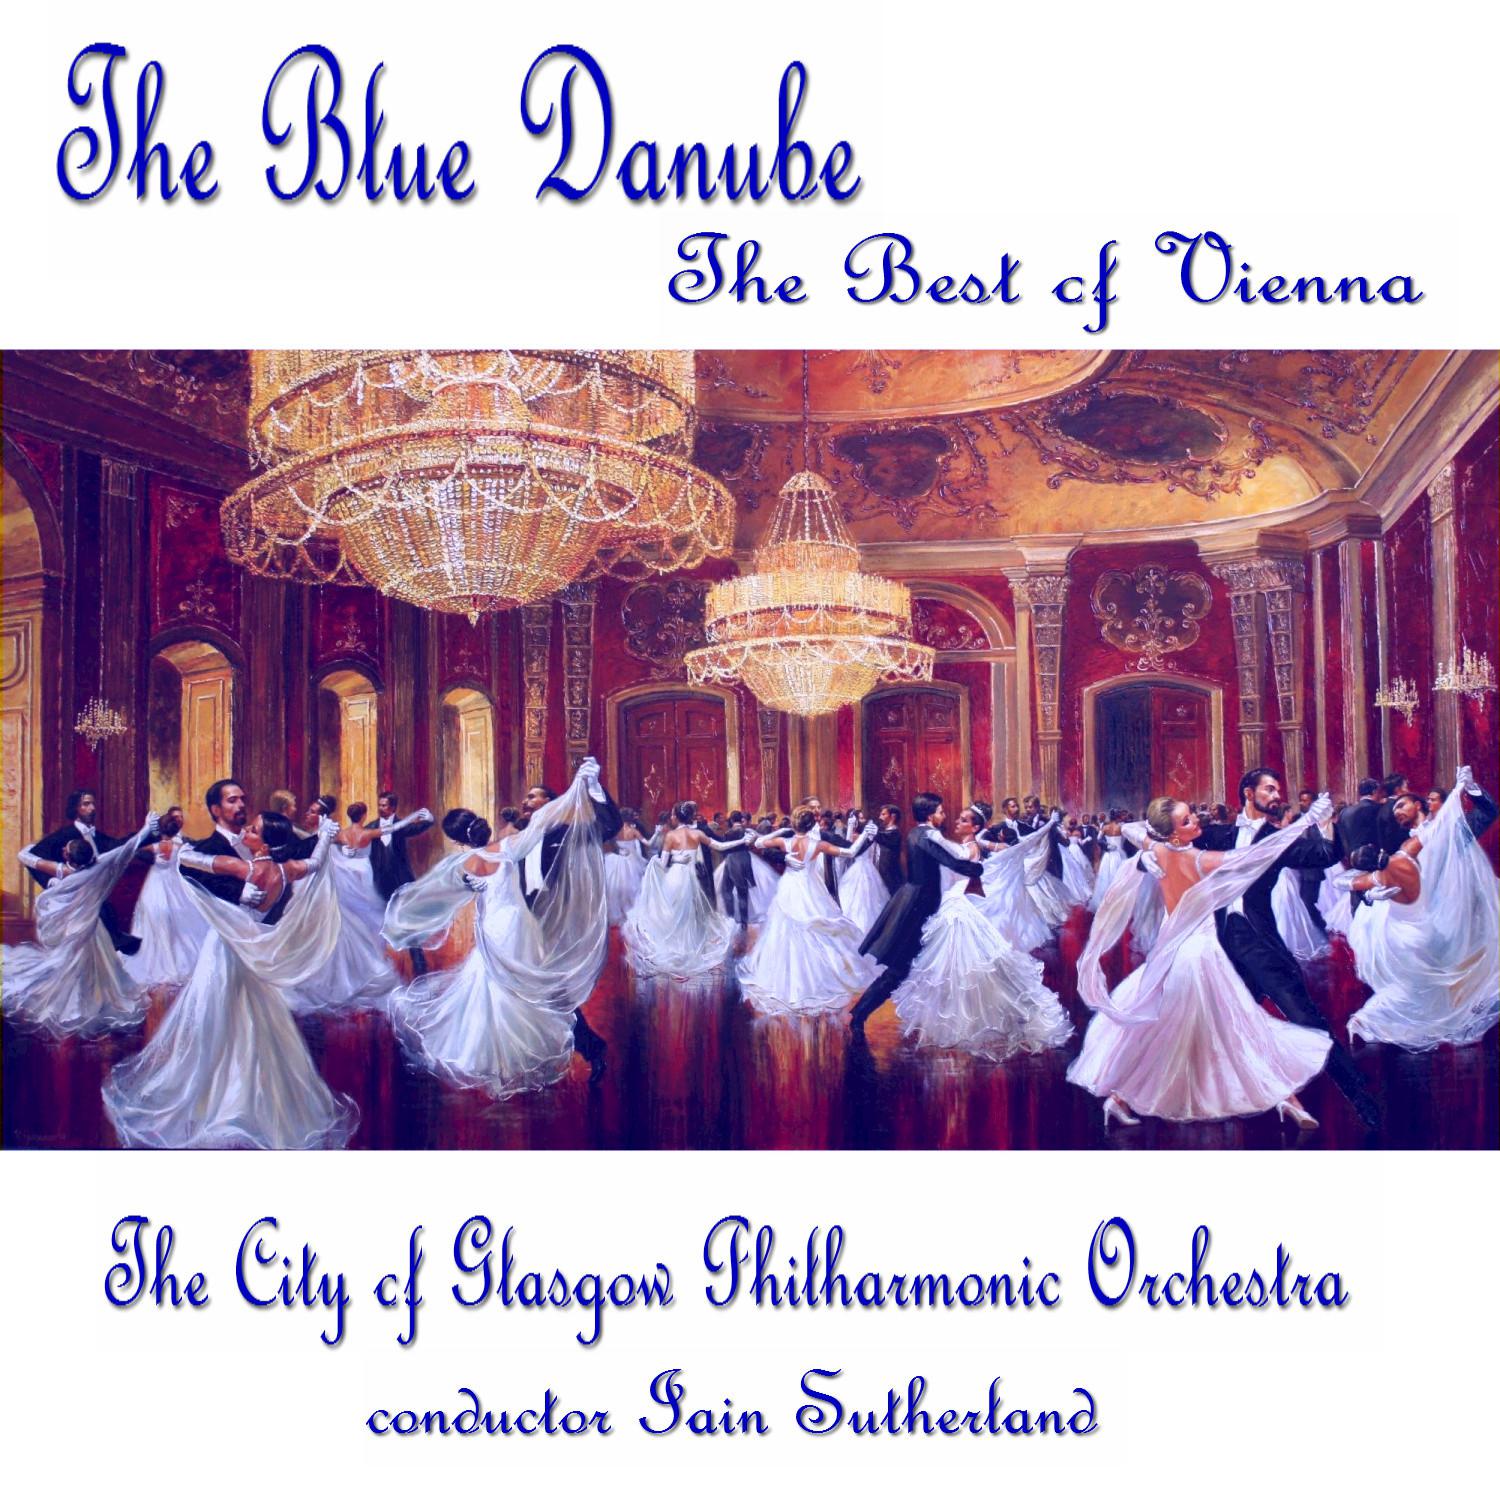 The City of Glasgow Philharmonic Orchestra - Champagne Polka